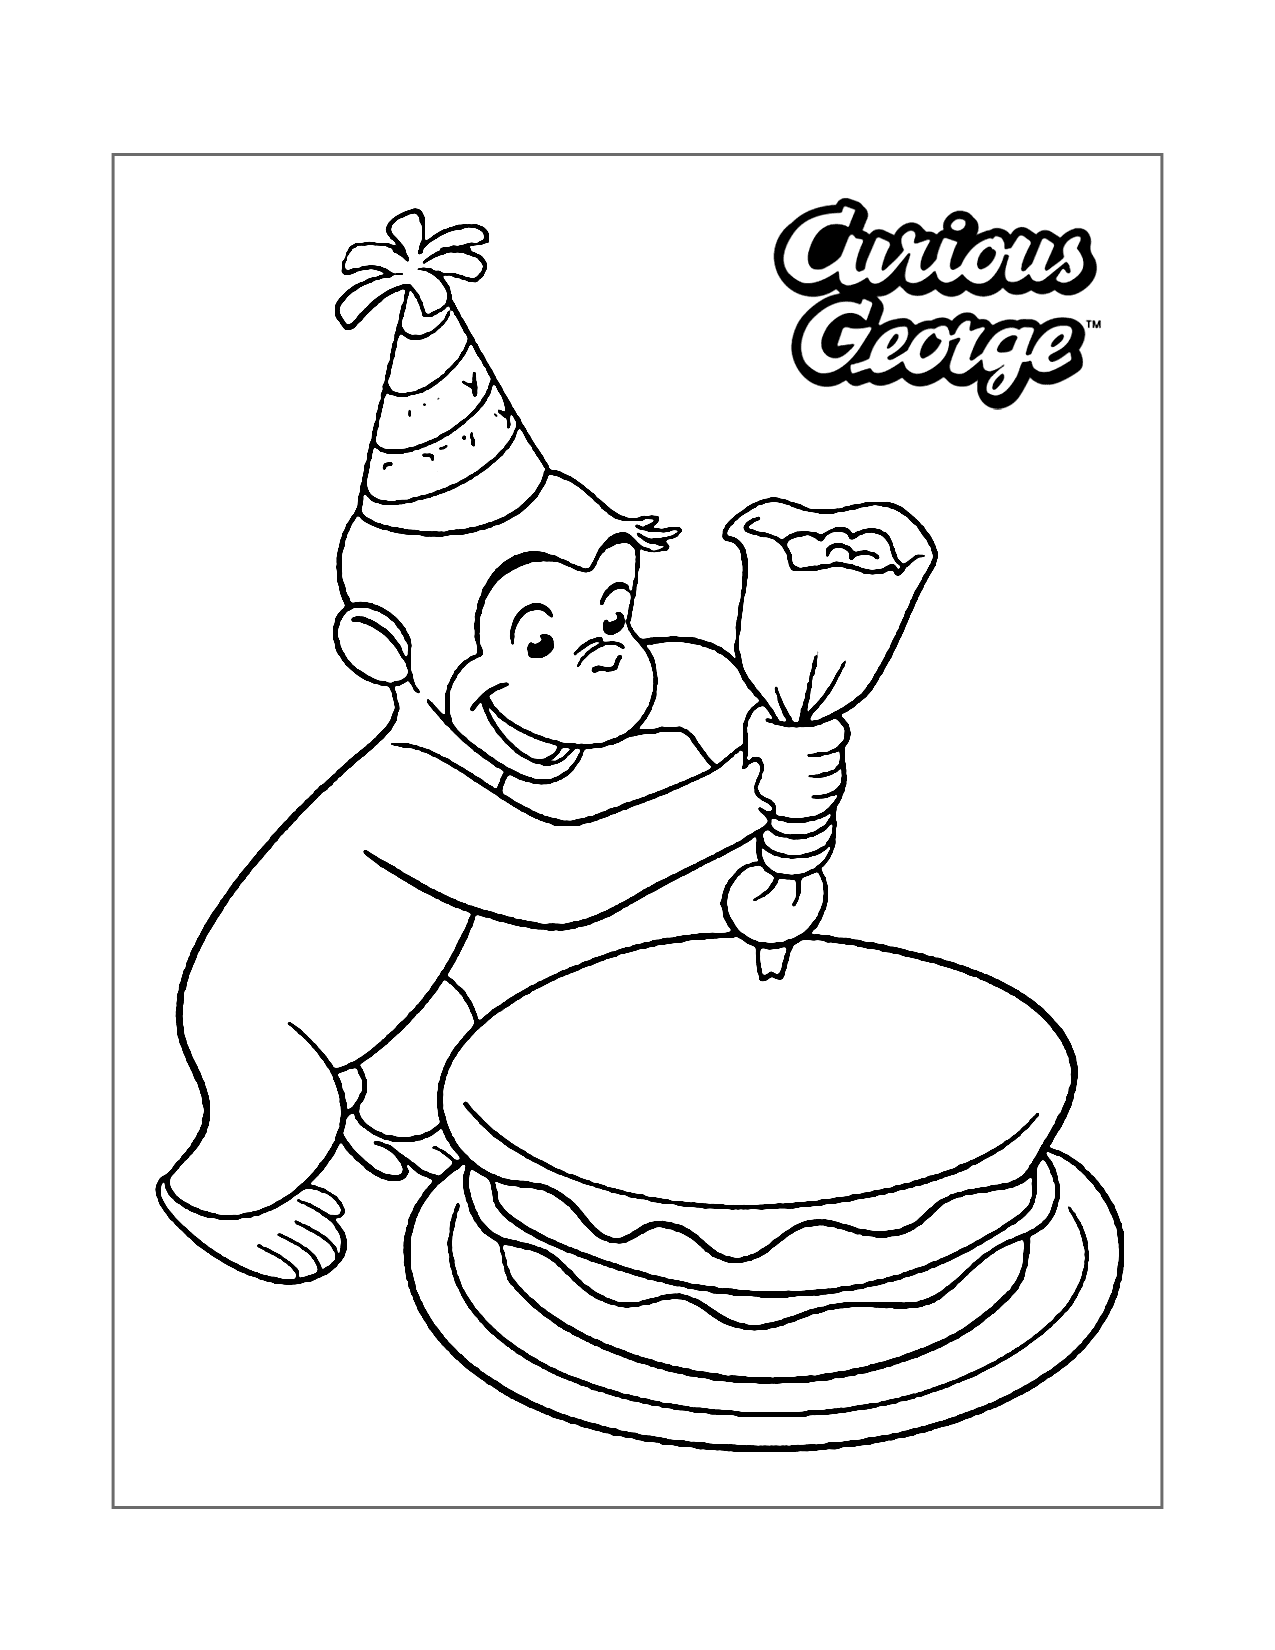 Curious George Making A Birthday Cake Coloring Page